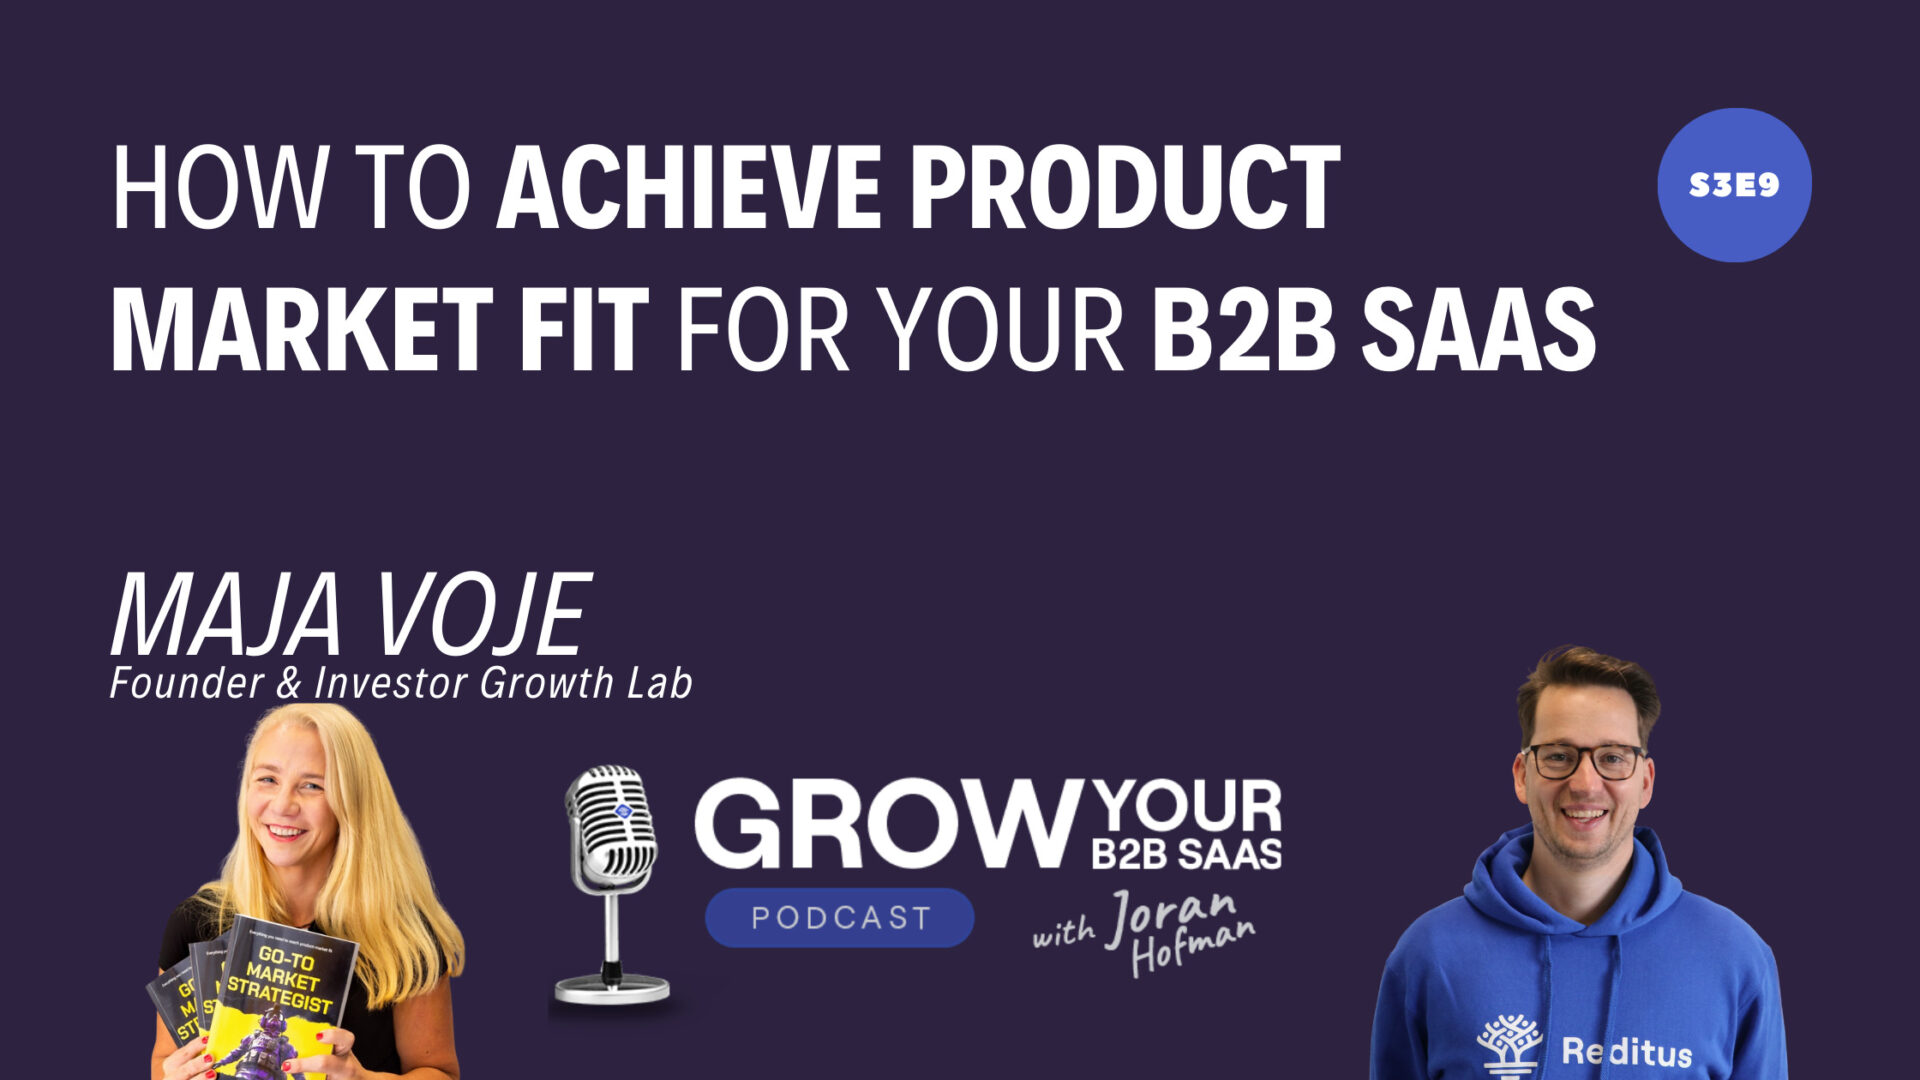 S3E9 – How to achieve Product Market Fit for your B2B SaaS With Maja Voje